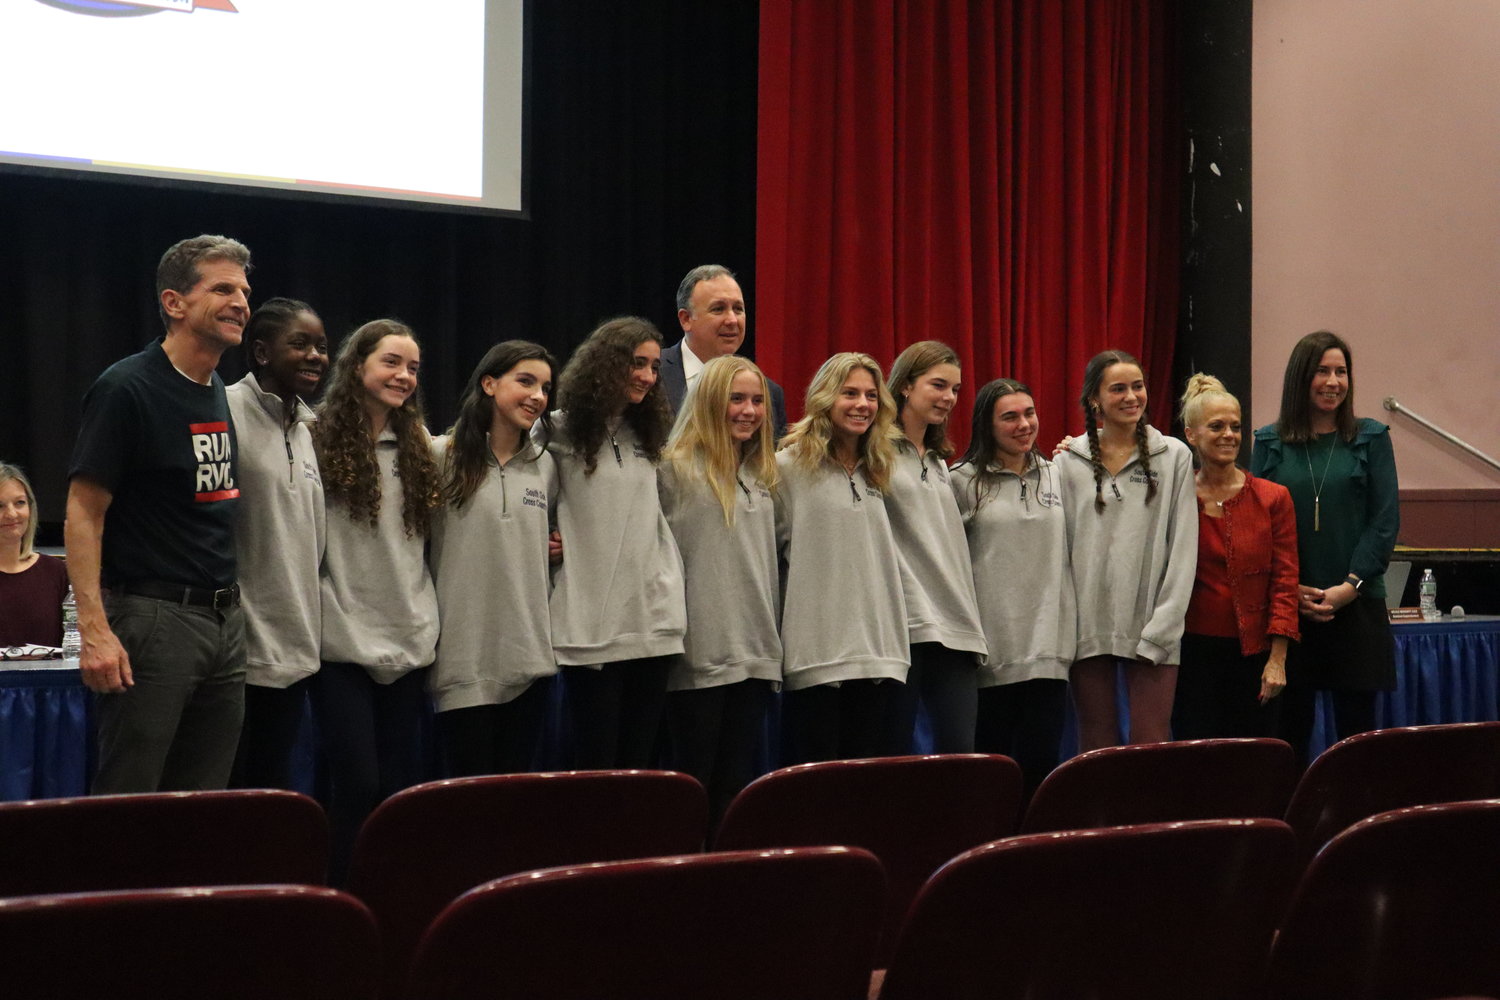 South Side High School’s girls’ cross-country team was recognized by the Board of Education for their athletic and academic achievements during the fall season. All of the runners played a role in the Cyclones’ wins of division, conference, and county titles.